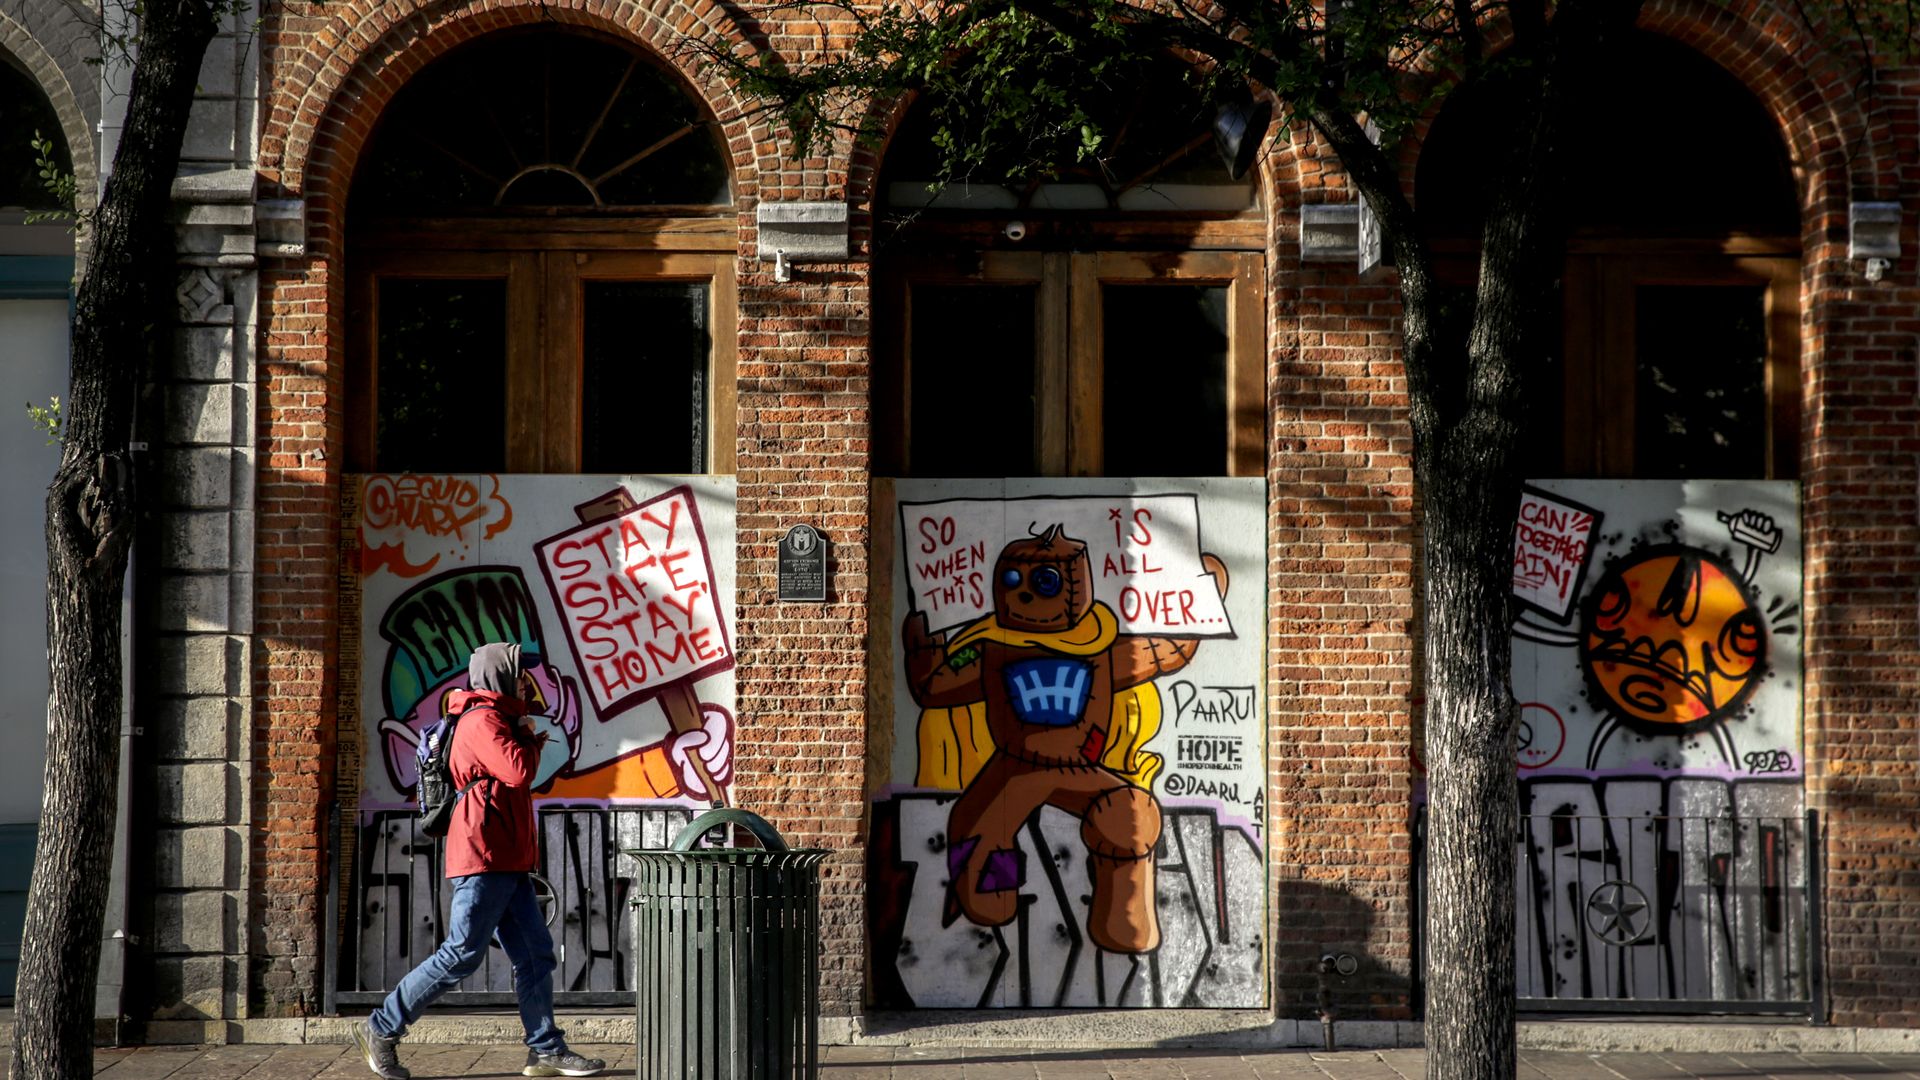 A pedestrian walks by boarded-up businesses on Sixth Street in Austin.